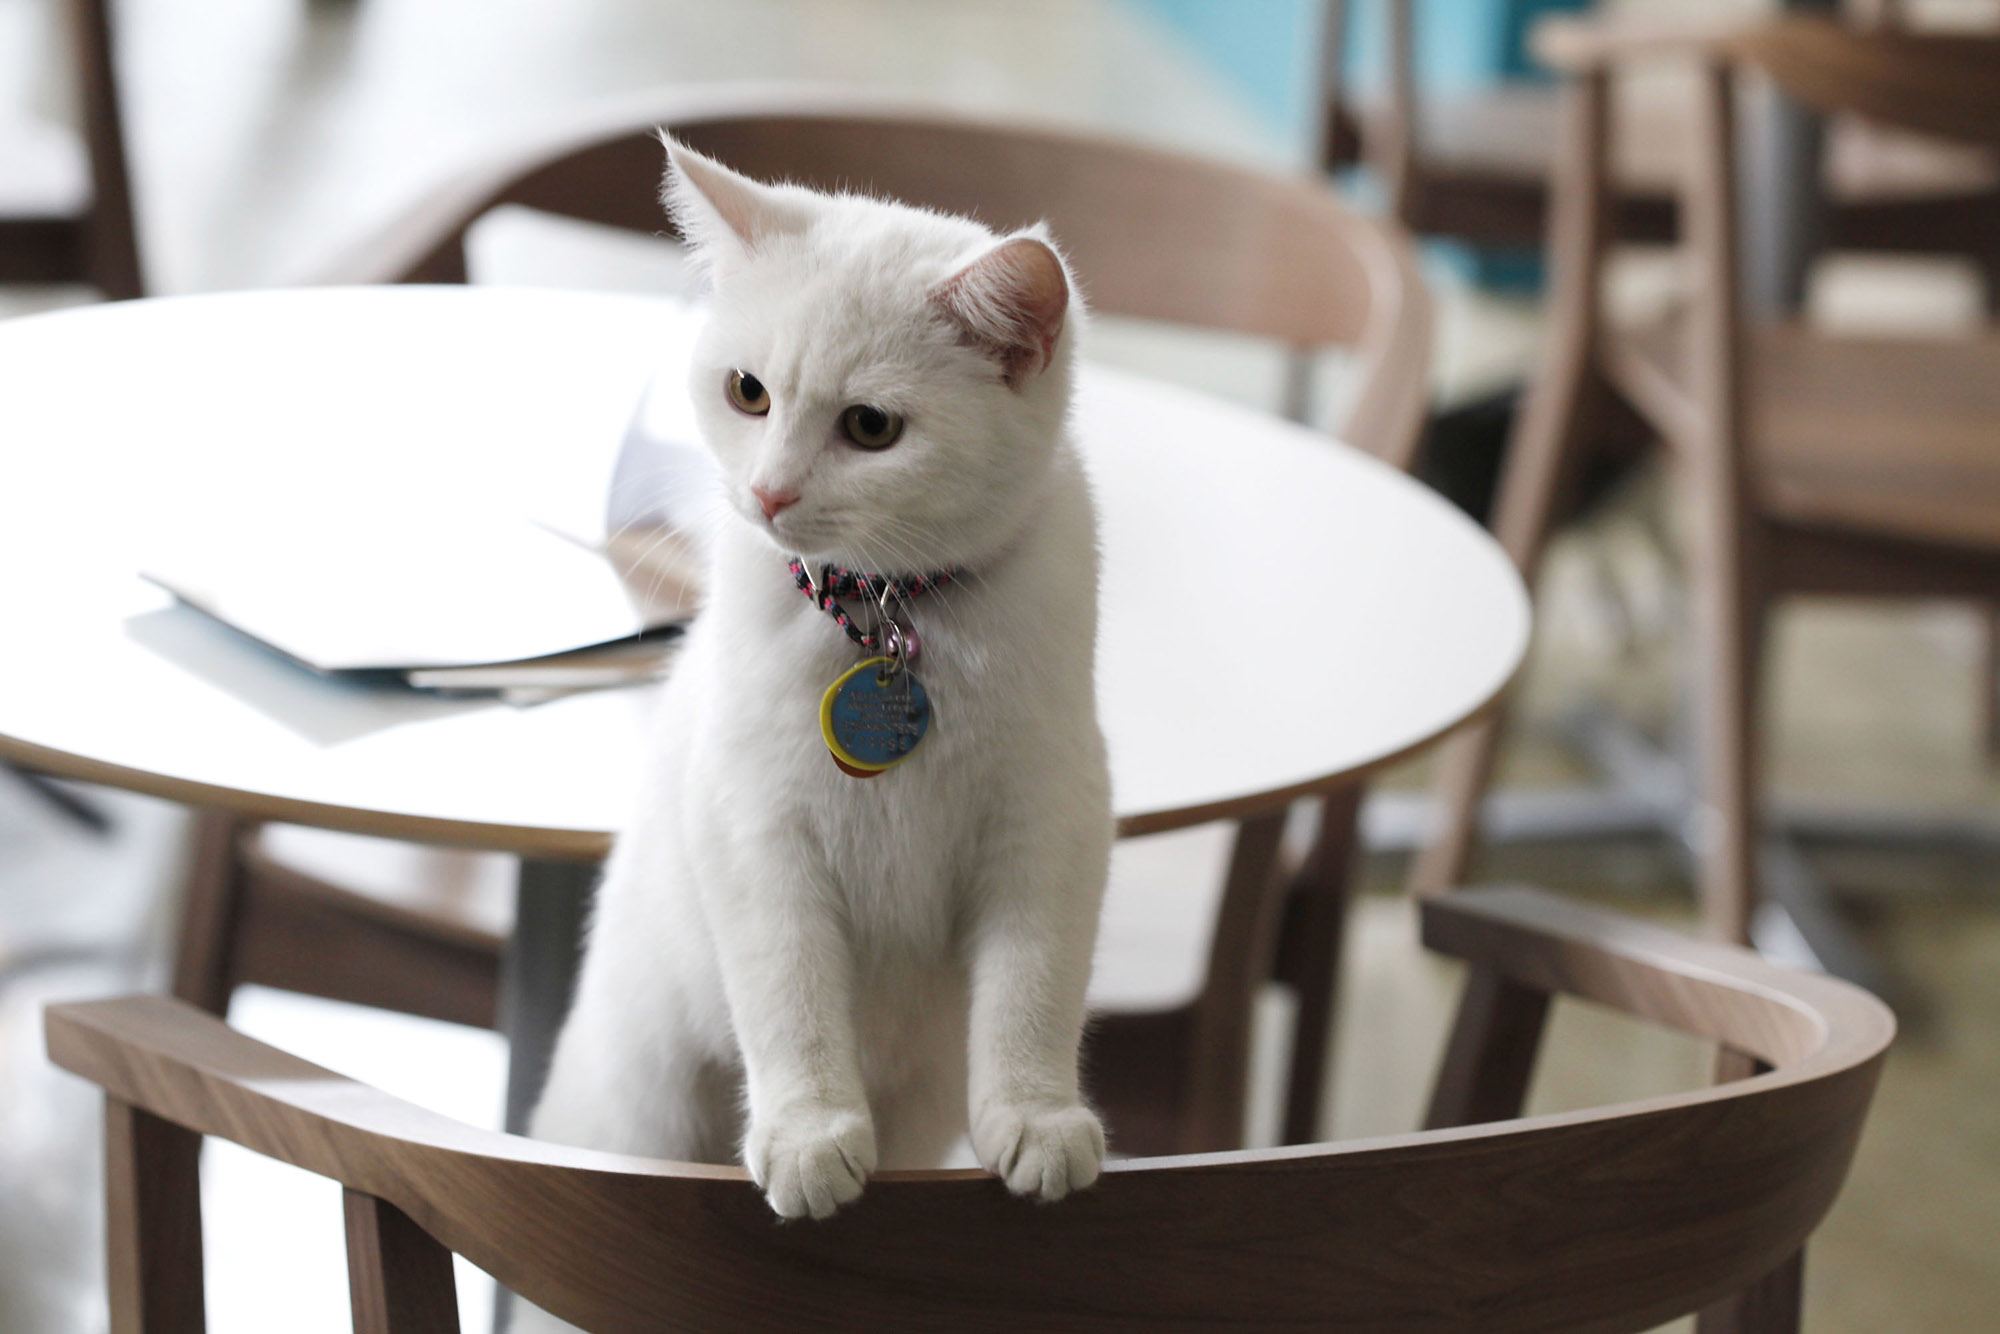  Cat  Caf  to Open in Philly Philly Happening